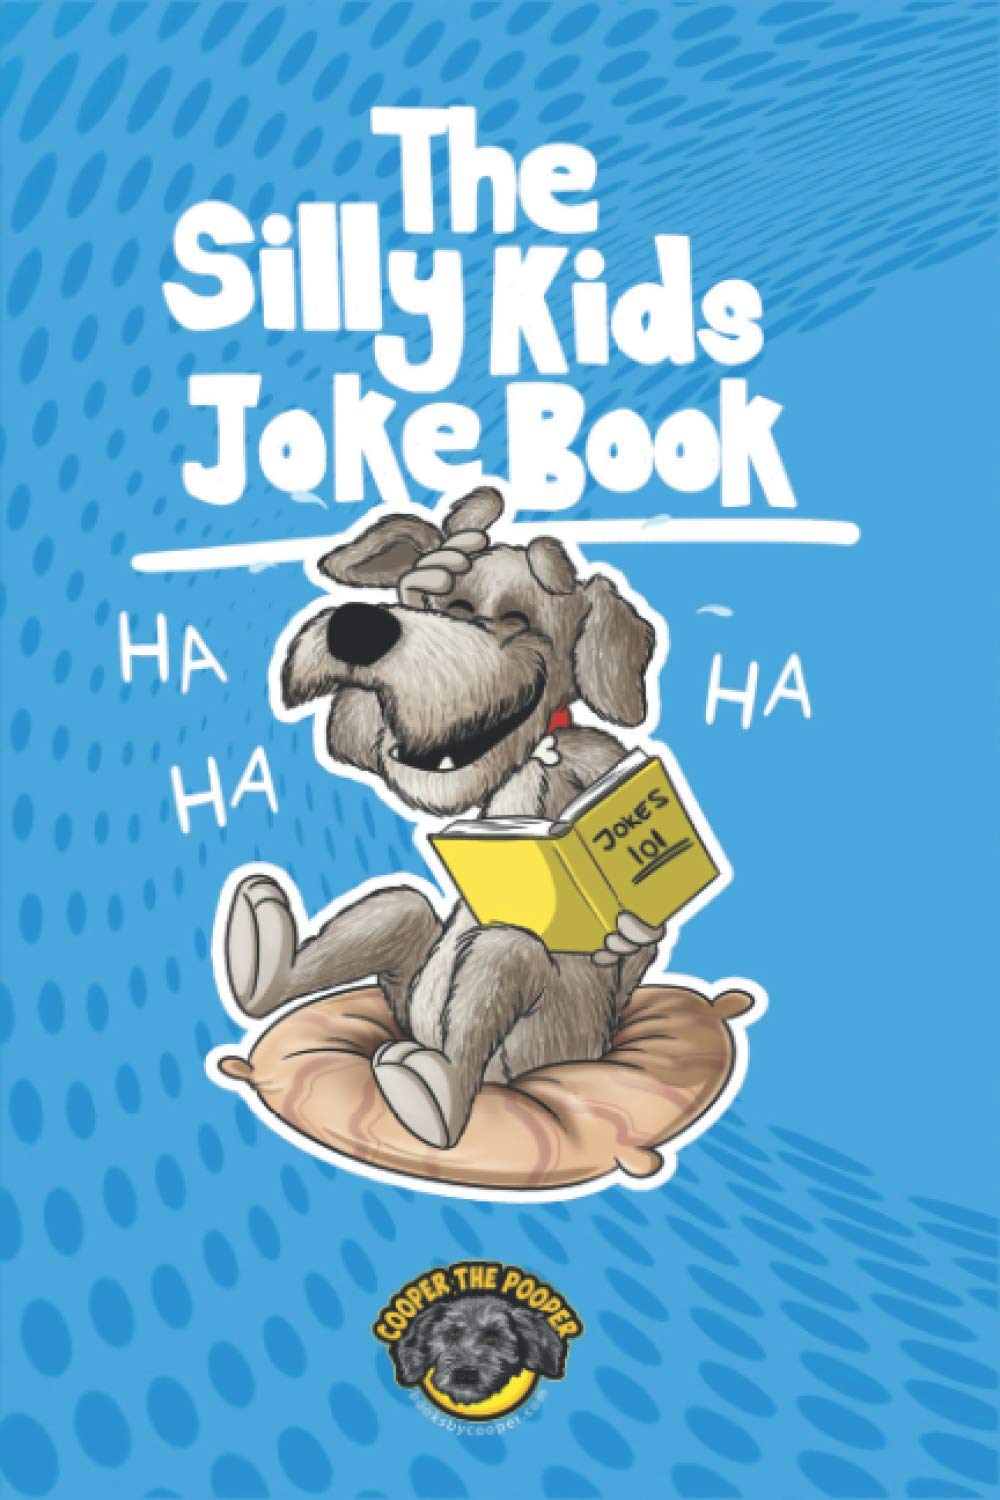 The Silly Kids Joke Book: 500+ Hilarious Jokes That Will Make You Laugh Out Loud! (Books for Smart Kids)